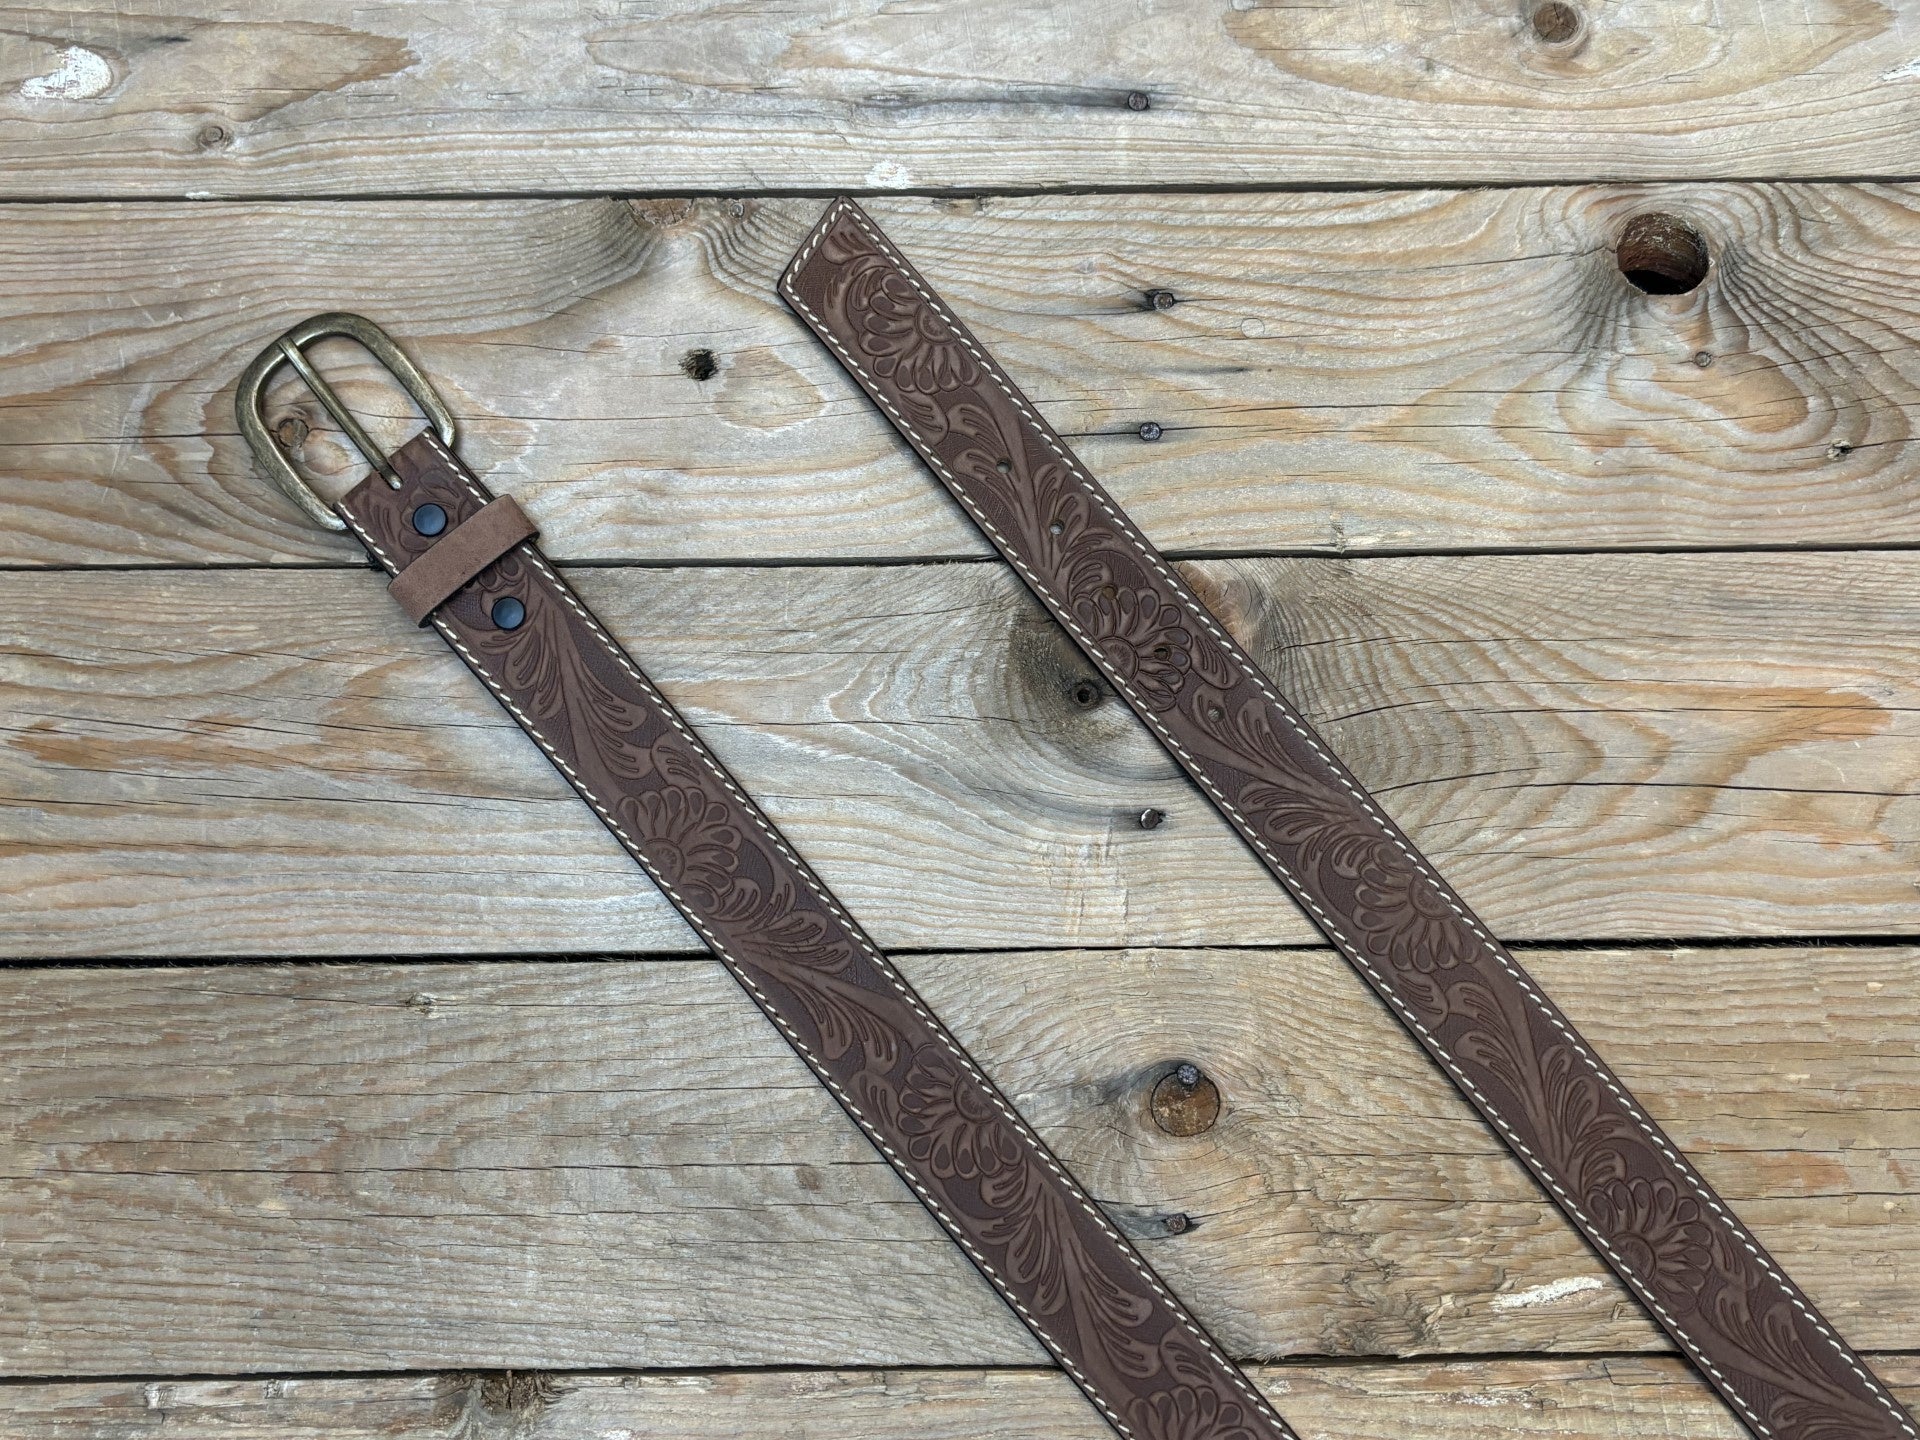 Womens Roper Distressed Leather Belt - Brown (7026889818189)